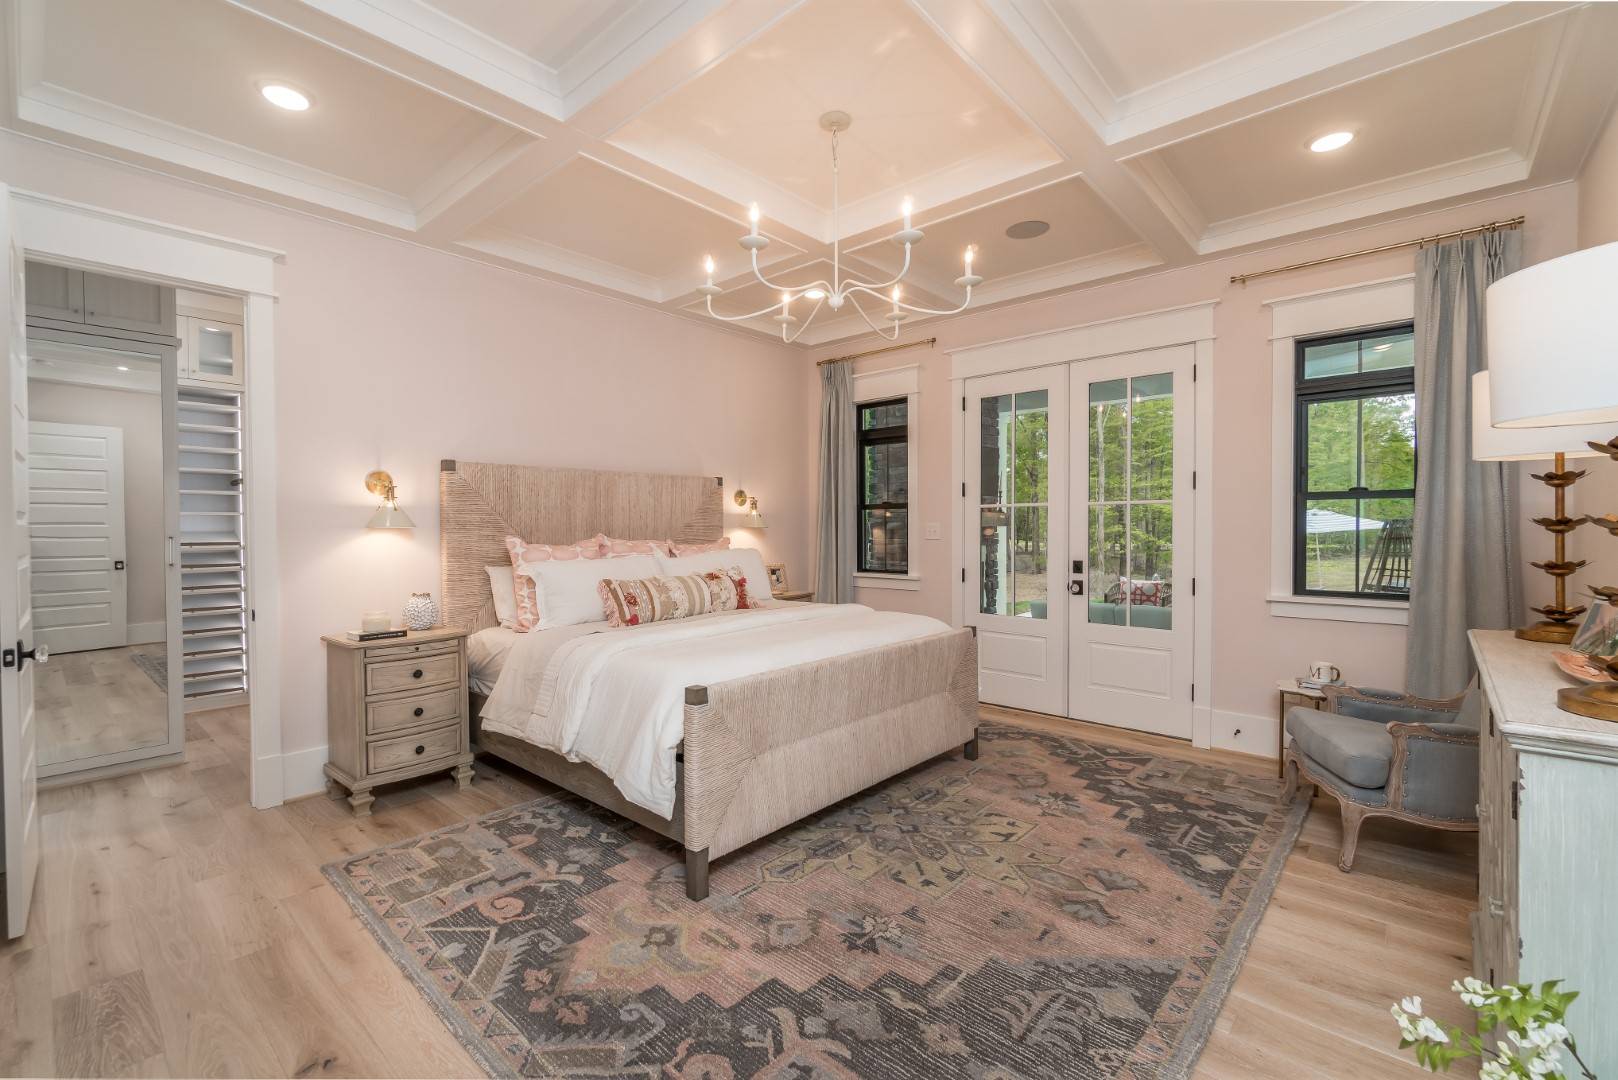 Luxurious Master featuring French Doors and Coffered Ceiling